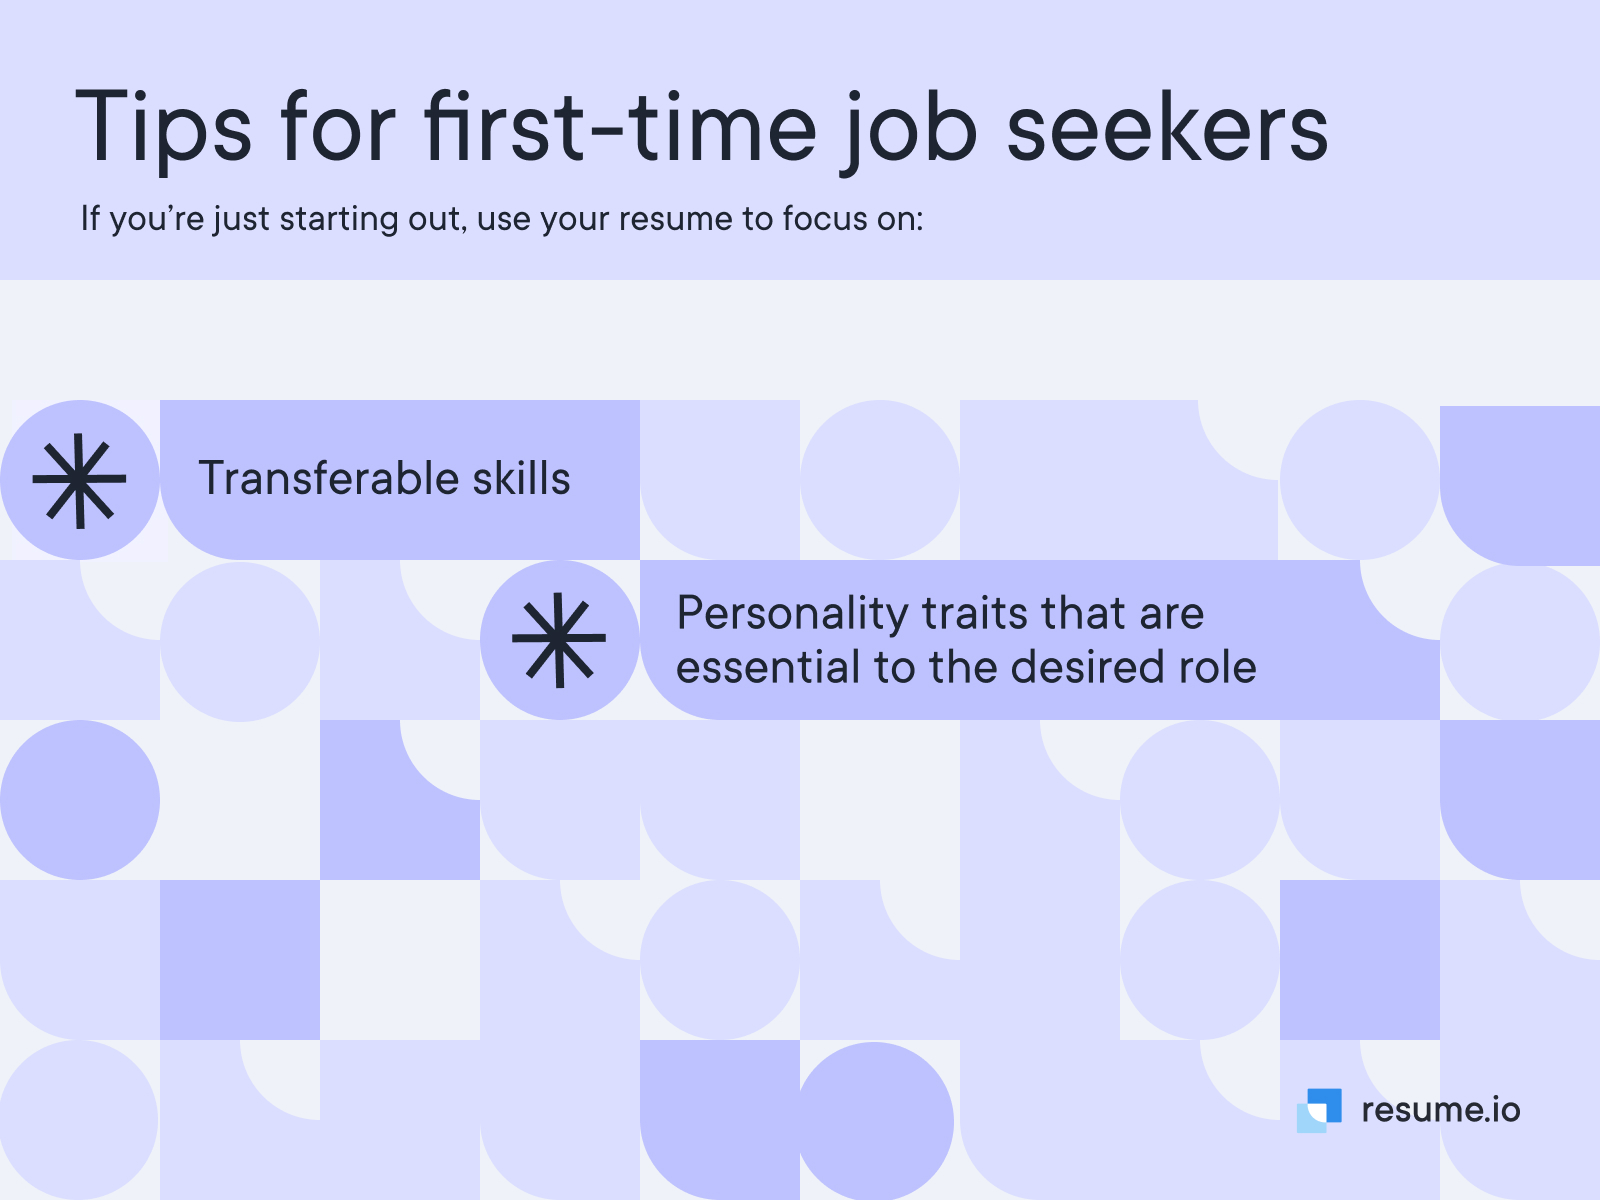 Tips for first-time job seekers